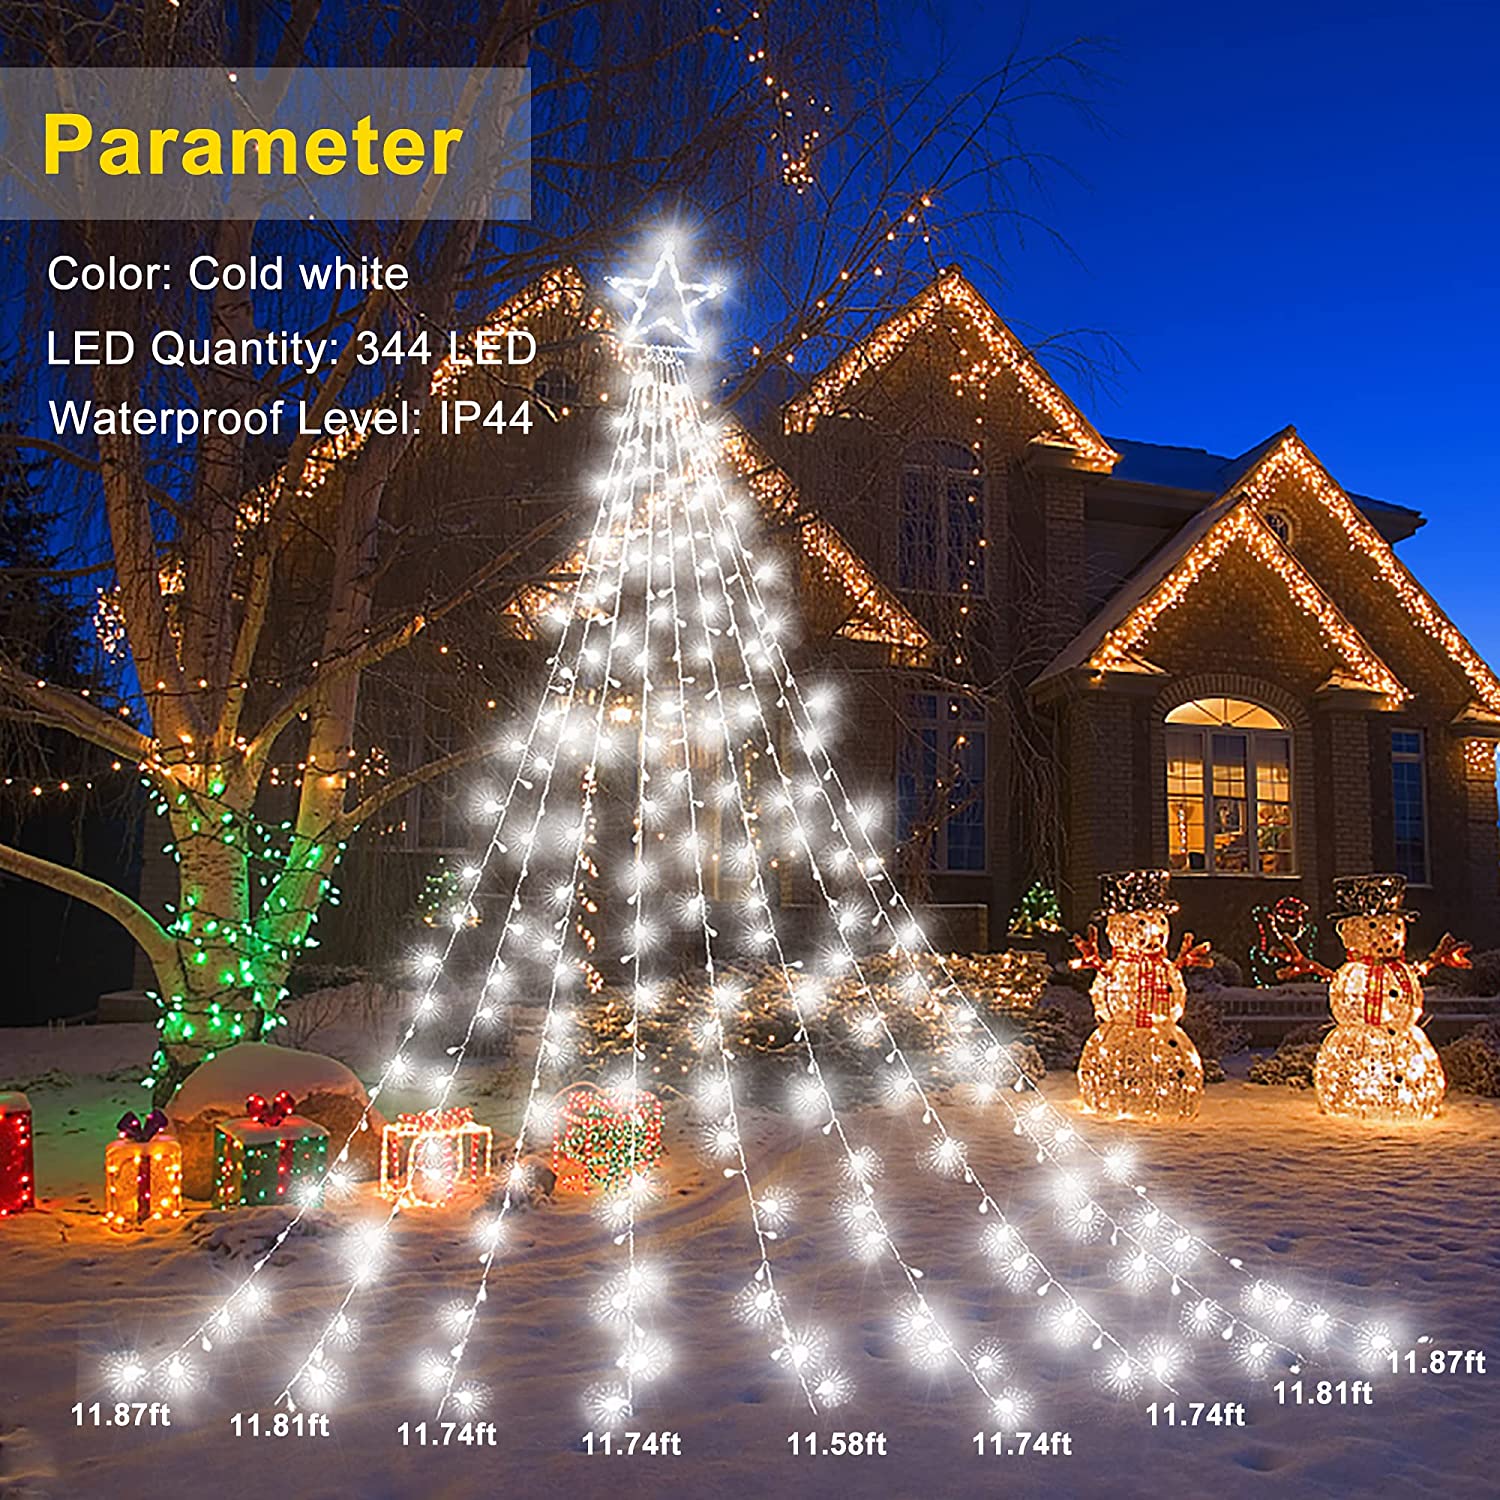 Outdoor Christmas Decorations Star Light,11.8 ft 344 LED Waterfall Tree Lights with Topper Star String Lights Plug in ,8 Lighting Mode Christmas Star Lights for Party Home Holiday Decor(Cool White)